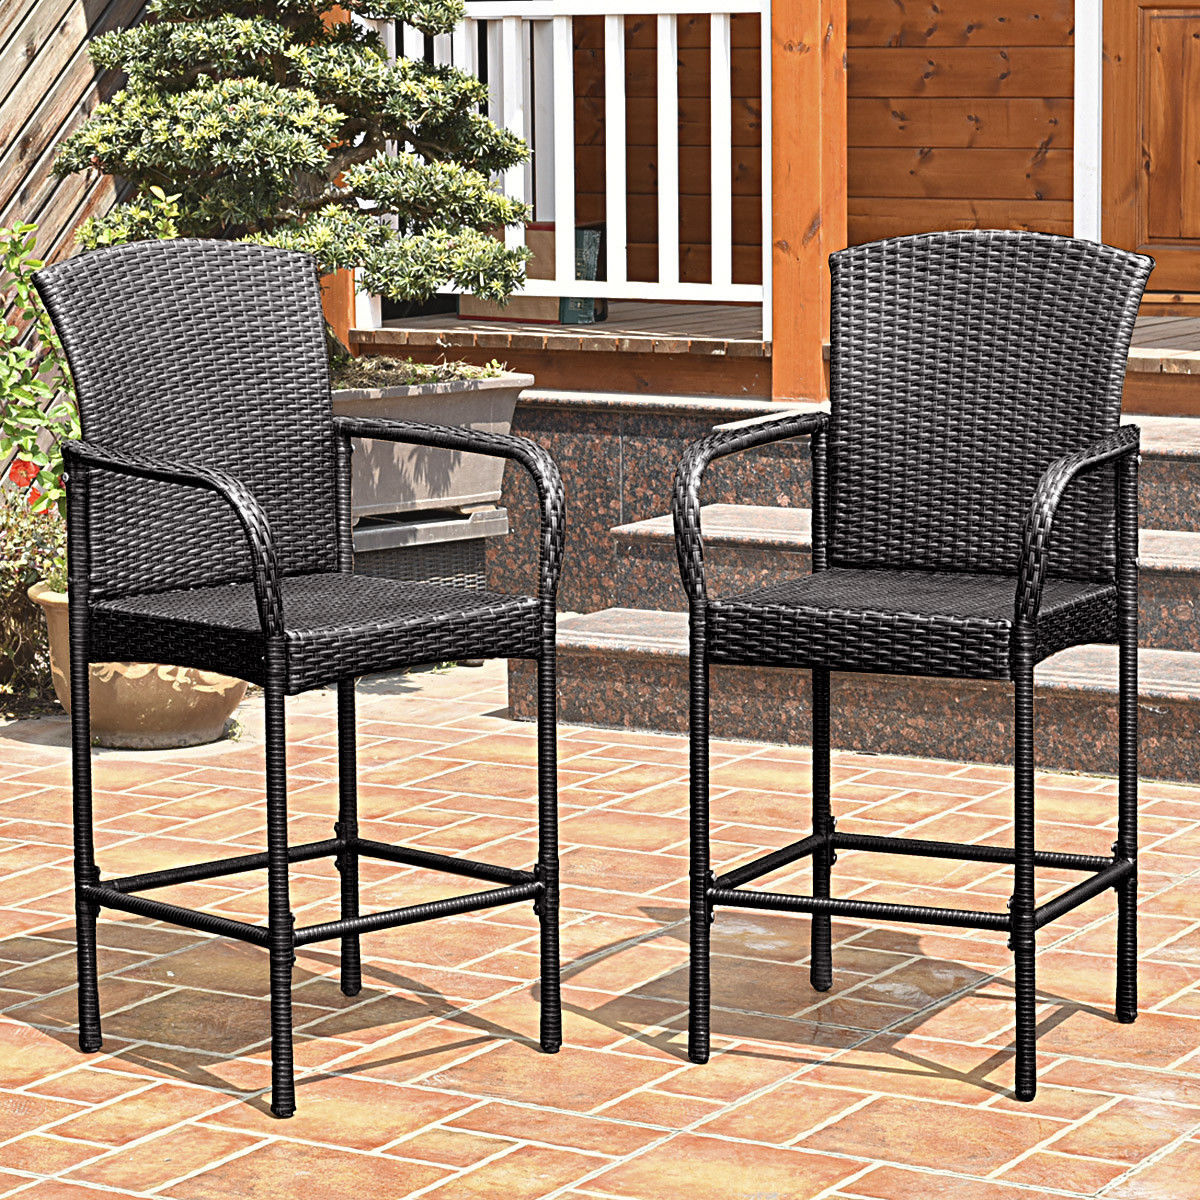 2PCS Rattan Wicker Bar Stool Patio Furniture Chair with Armrest Outdoor Indoor